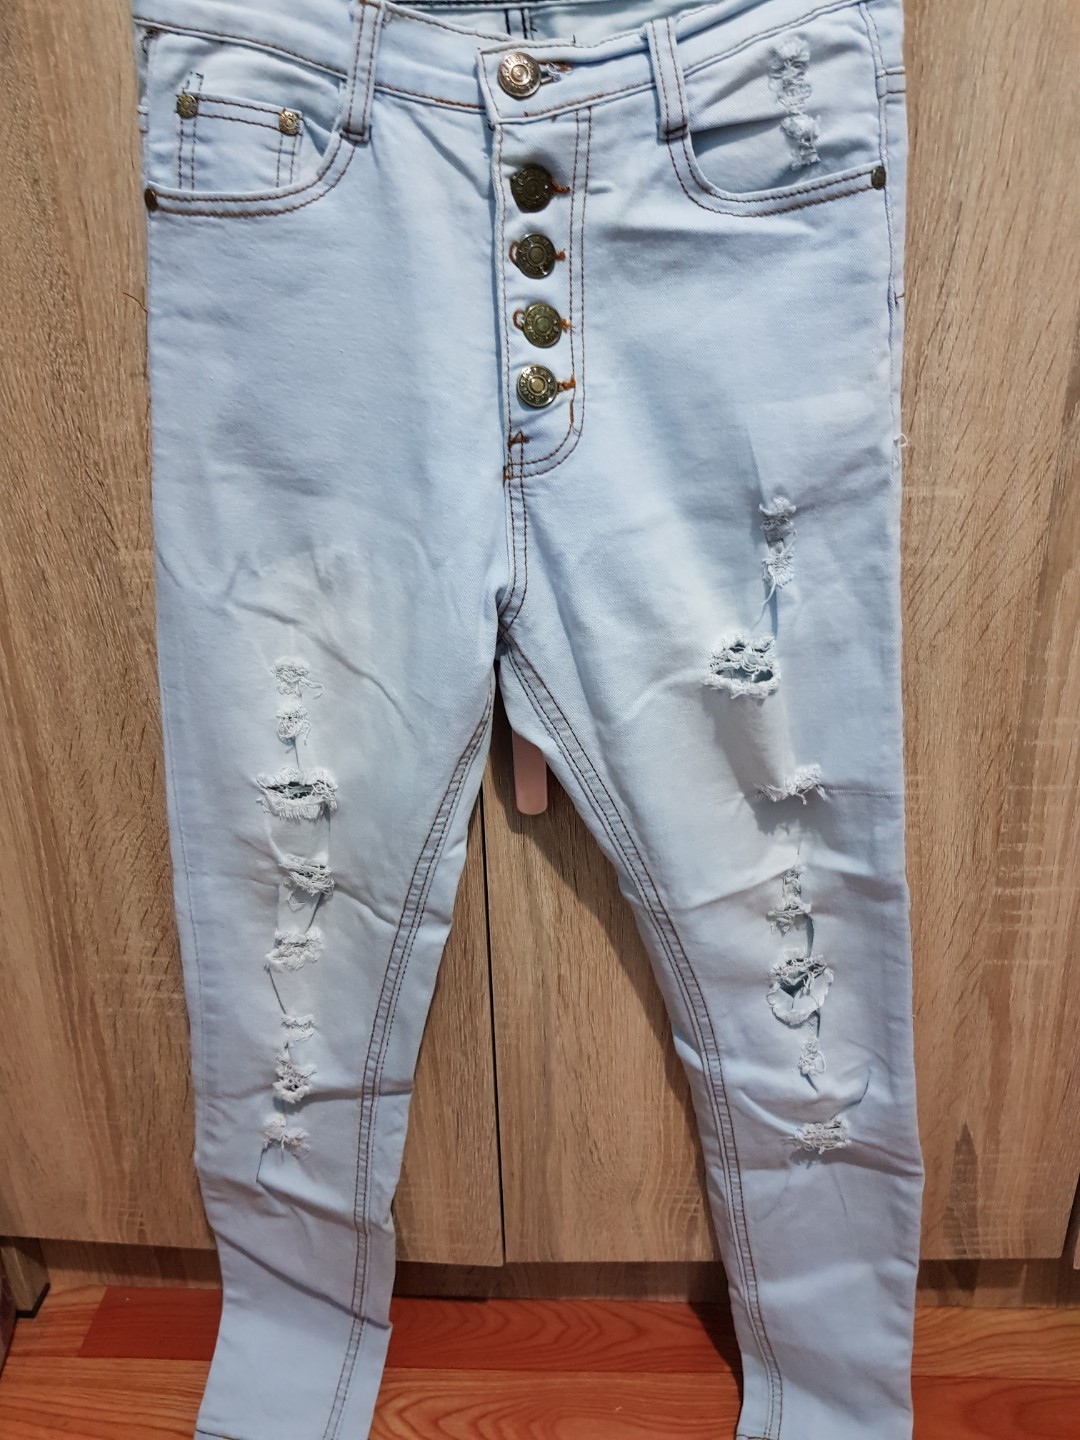 tattered trousers